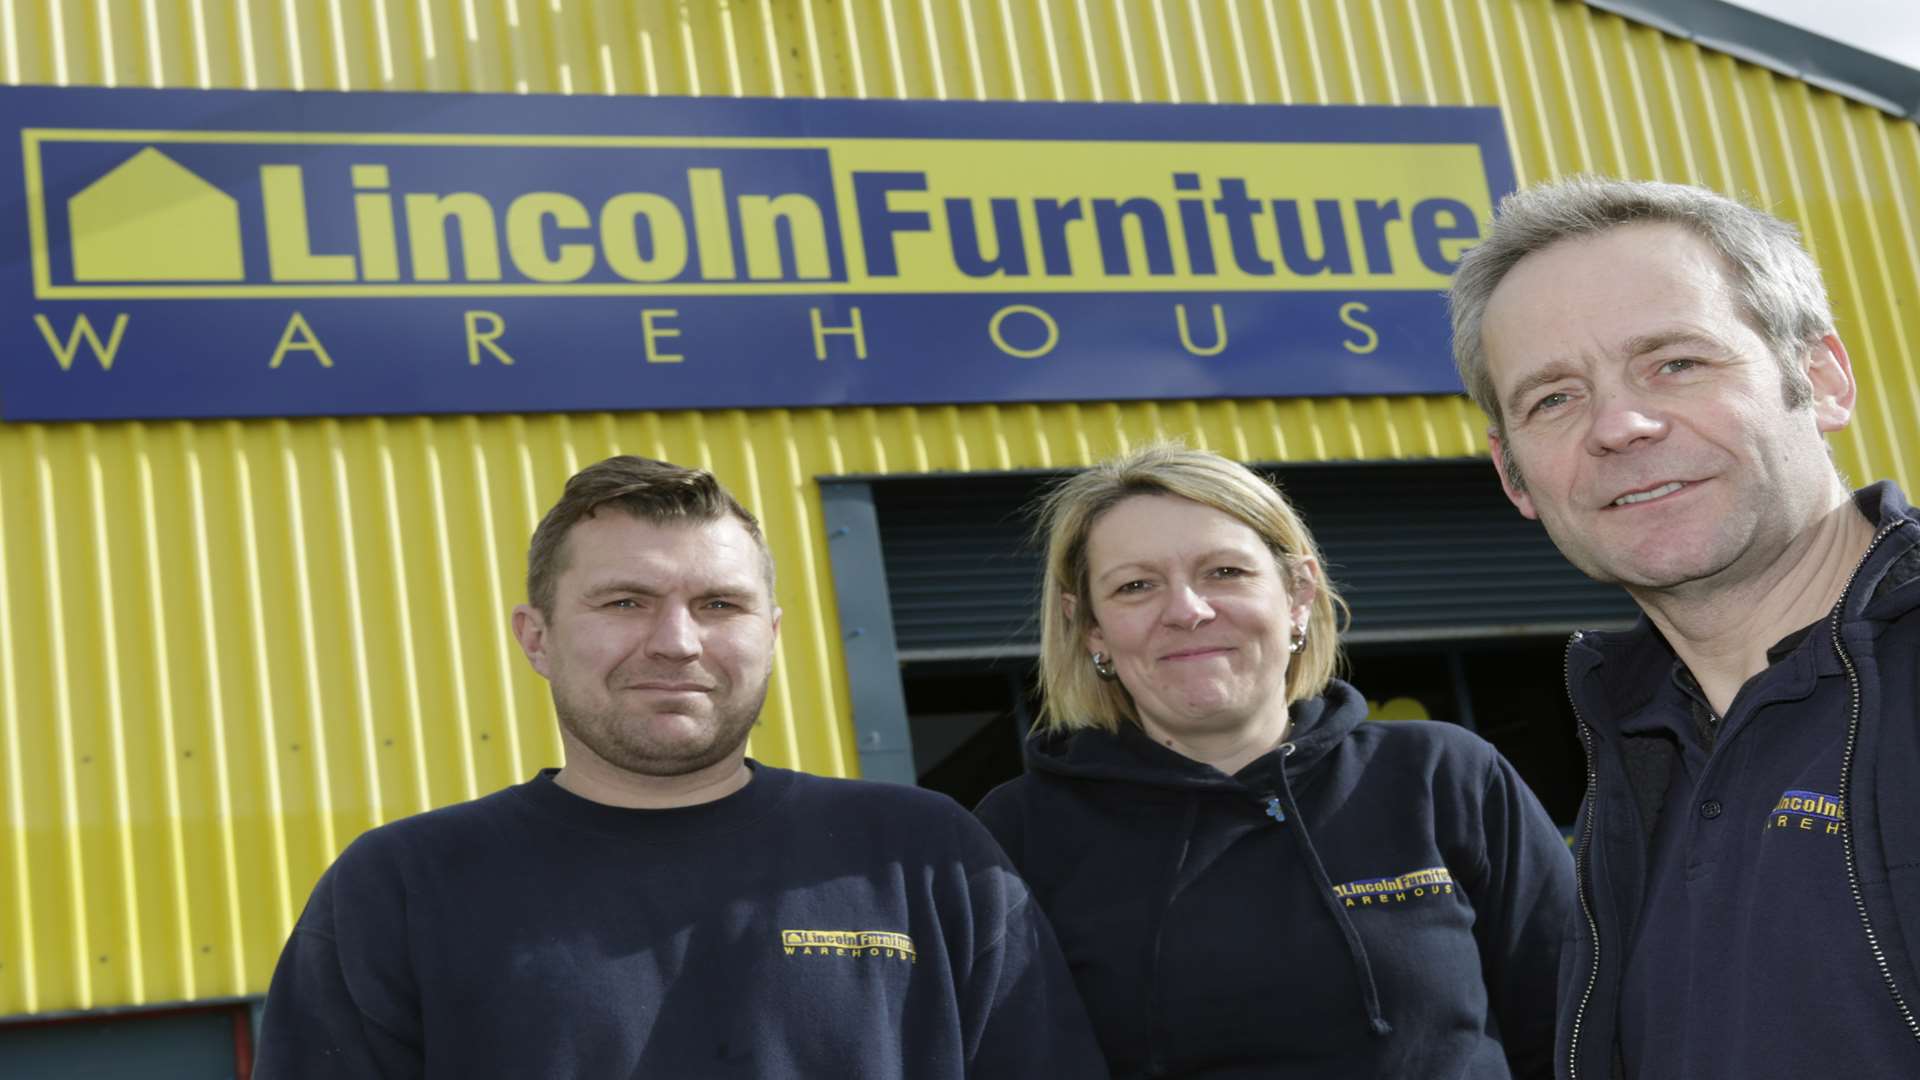 From left to Right: James Butler, Jo Downie, Steve Swan. Some of the management team at Lincoln Furniture Warehouse. Picture: Martin Apps